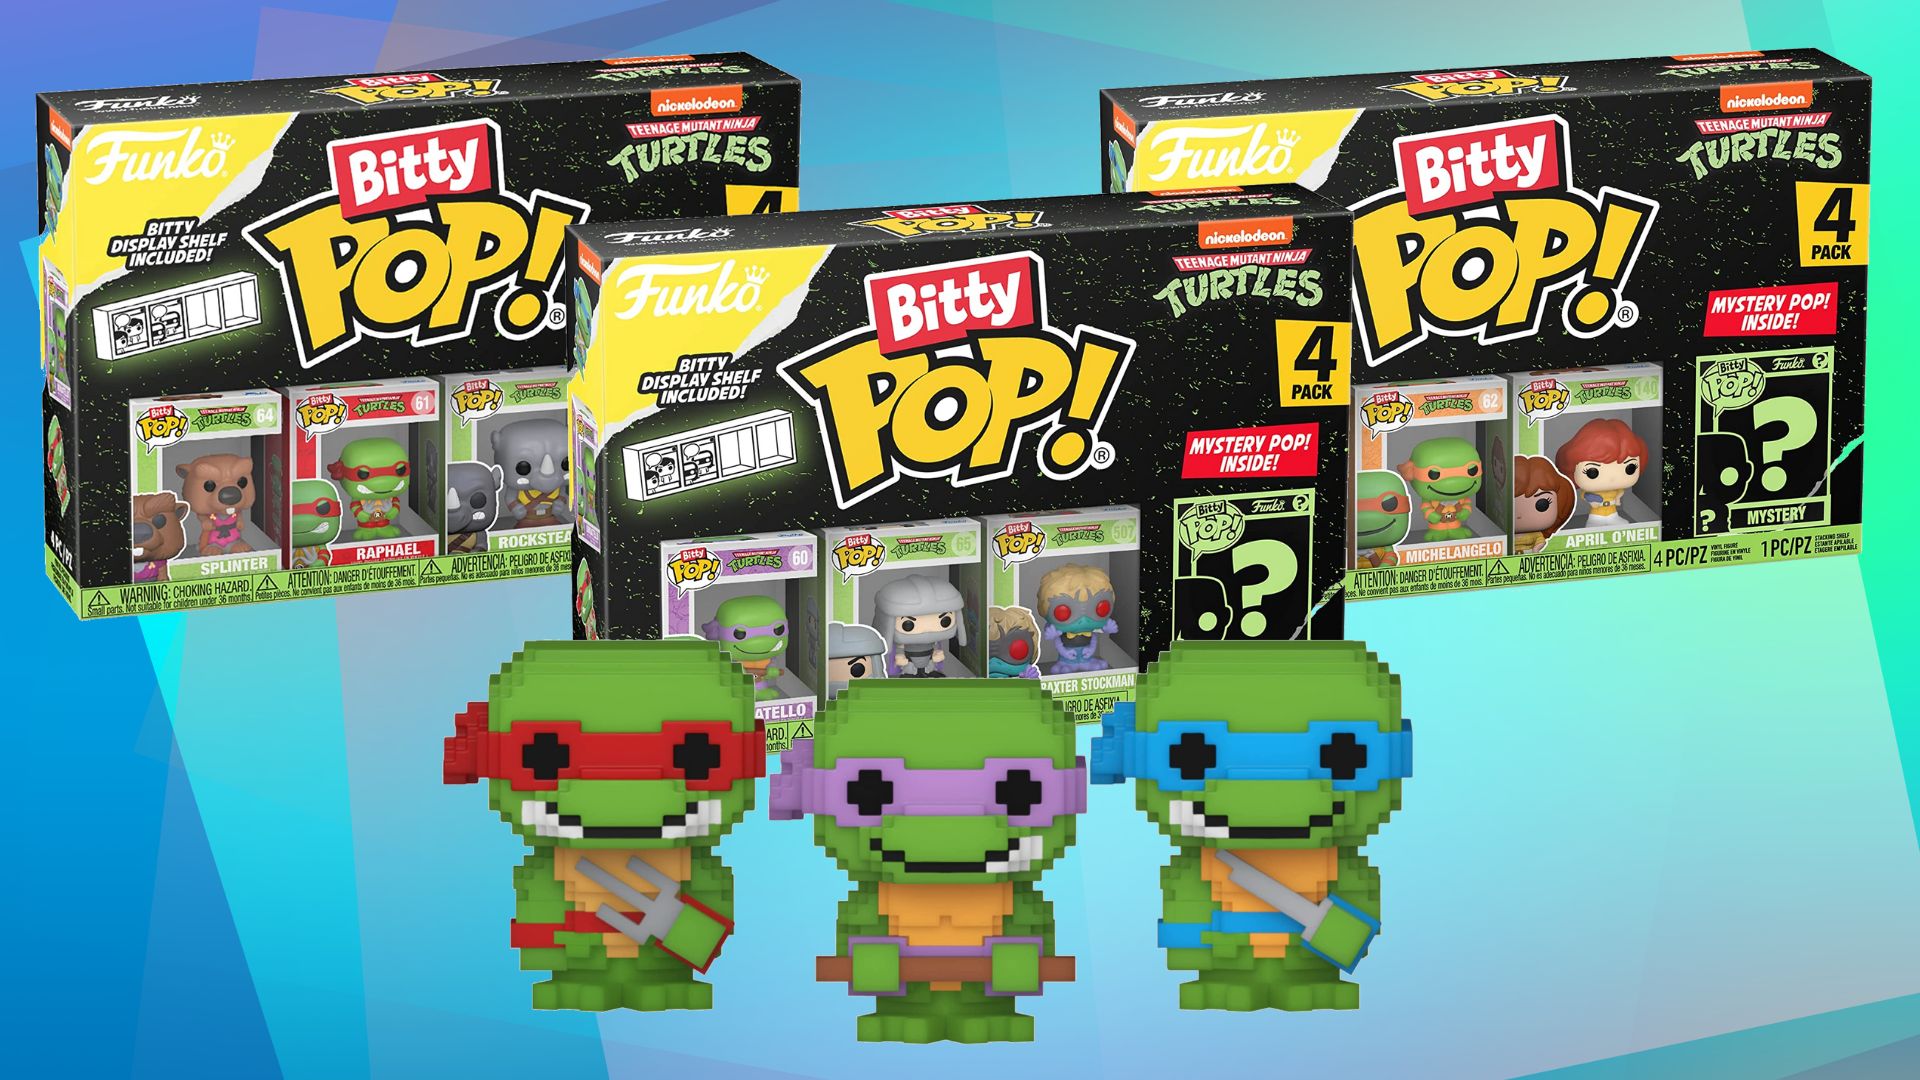 New Teenage Mutant Ninja Turtles Funko Bitty Pops Are Up For Preorder Image